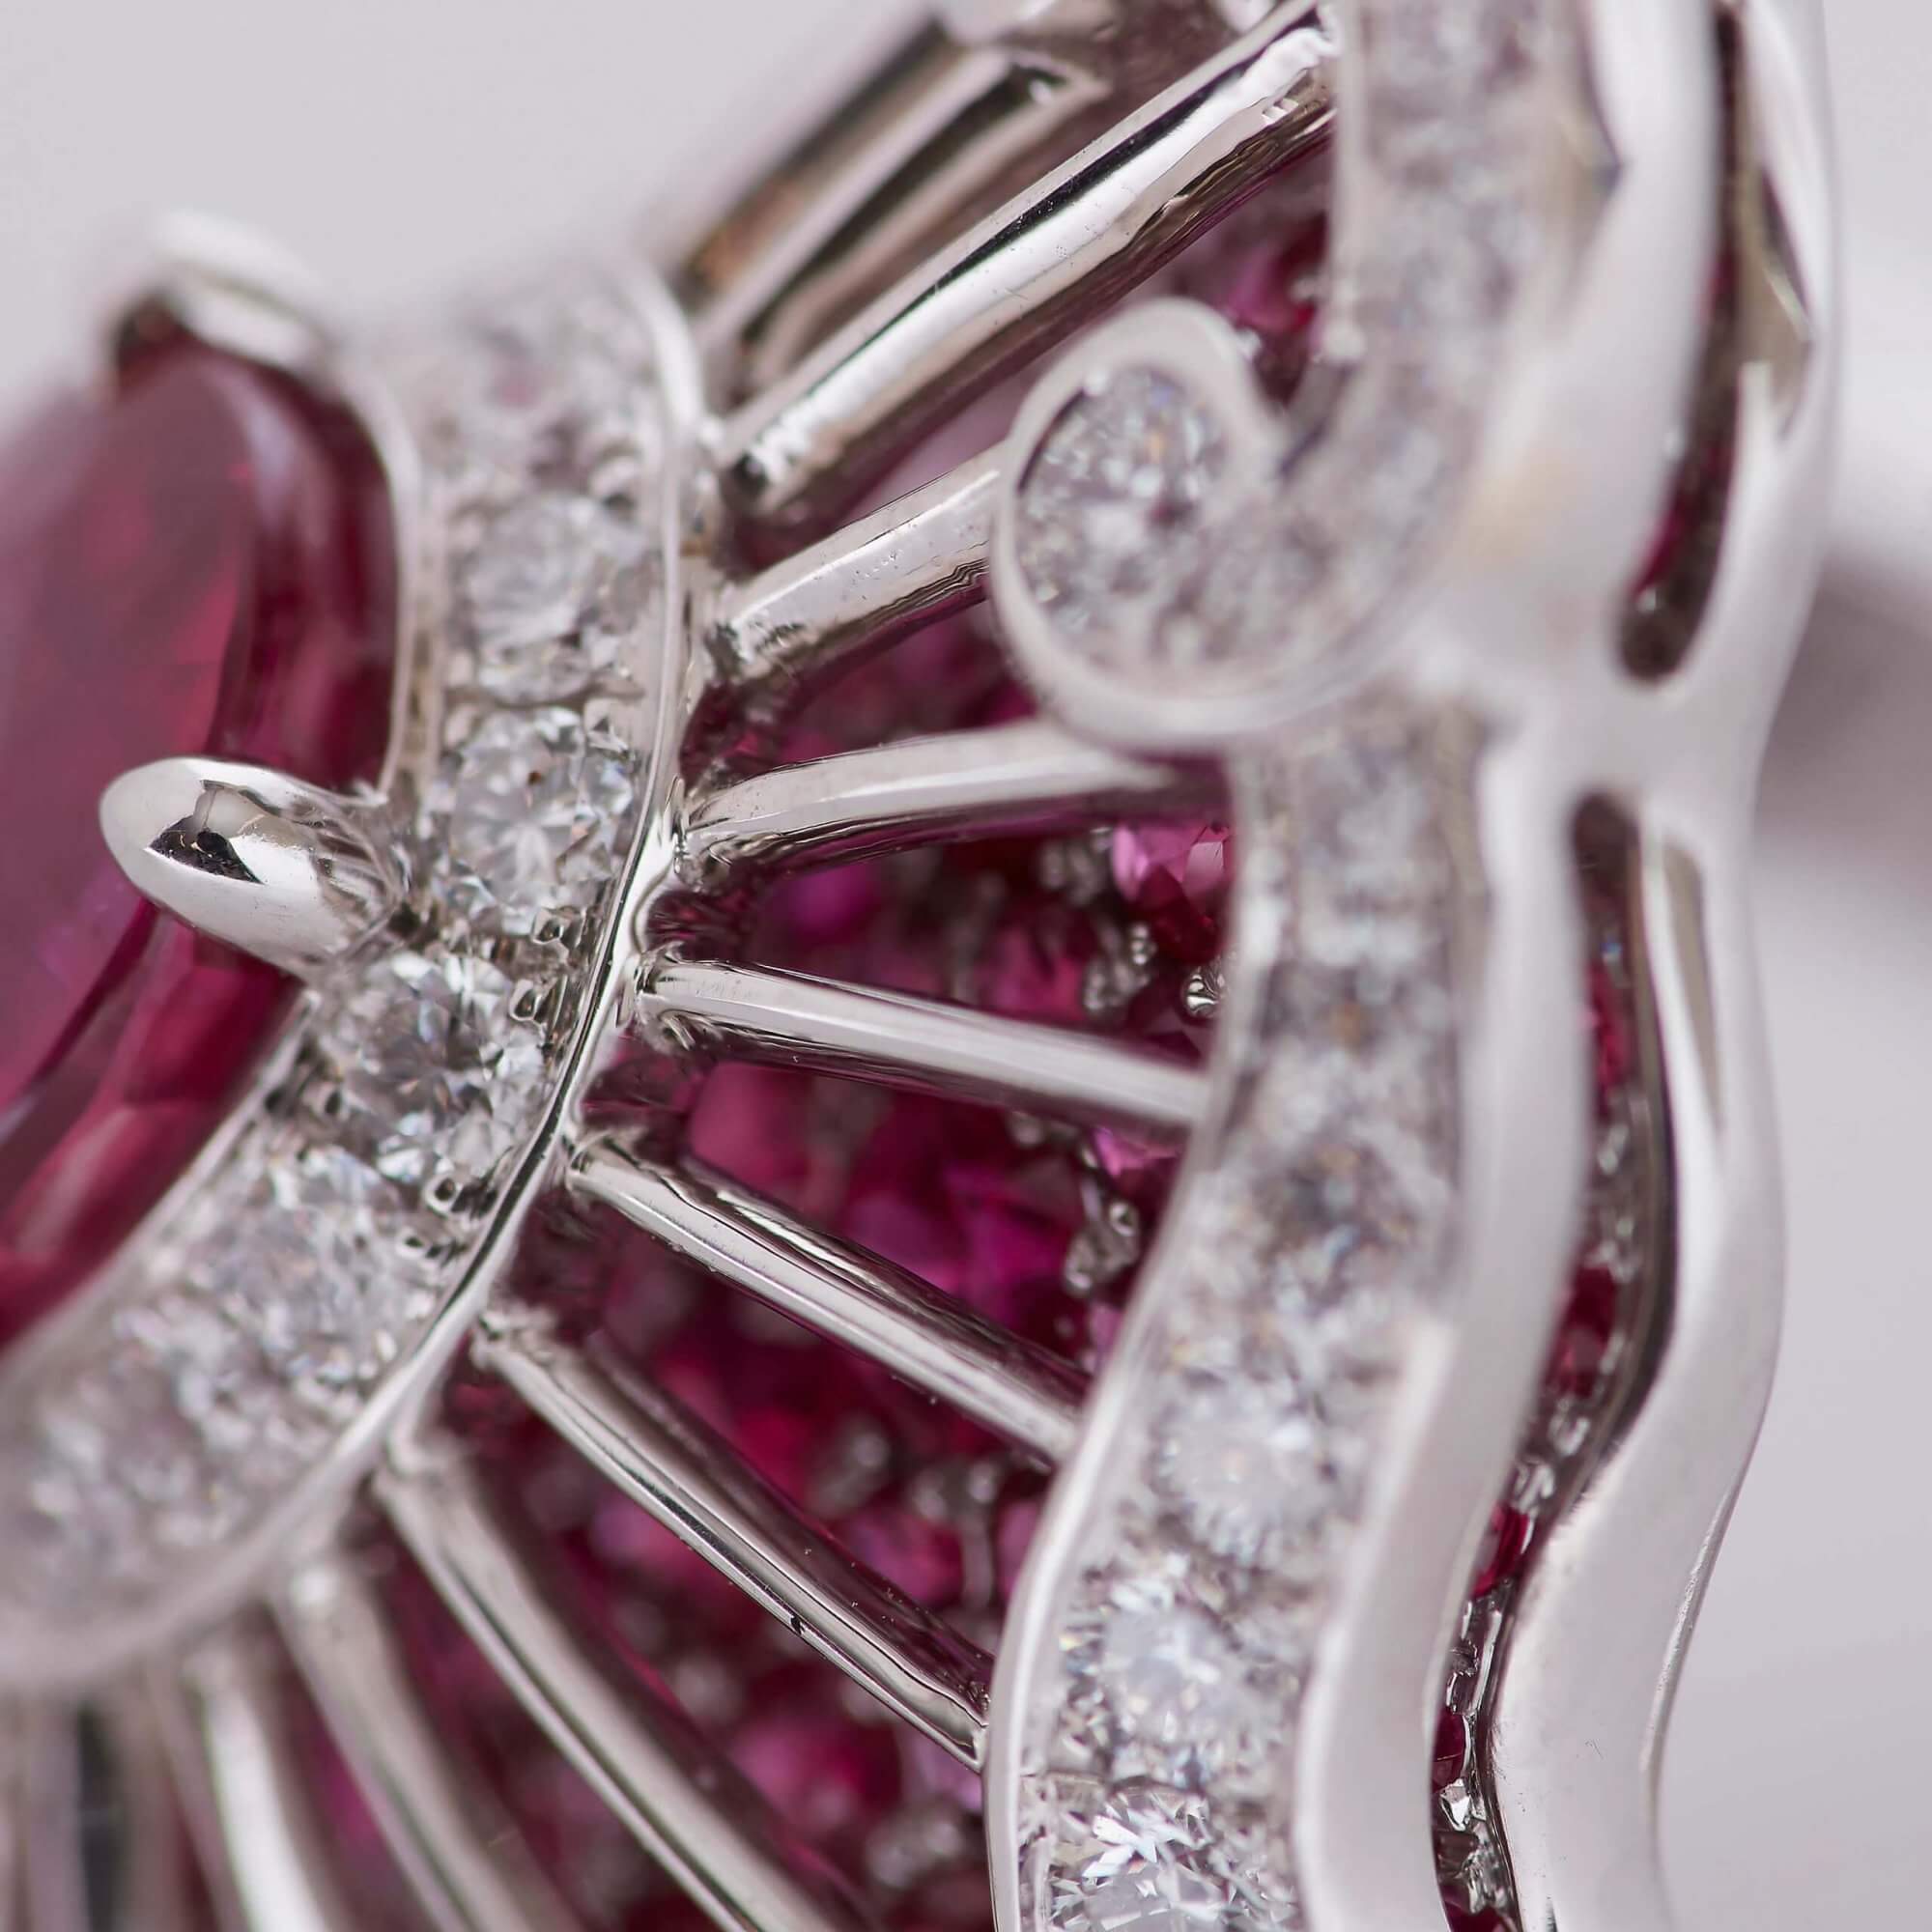 Garrard Jewelled Vault Oval Burmese Pigeons Blood Ruby Ring In 18ct White Gold with Rubies and Diamonds 2015818 Detail 1